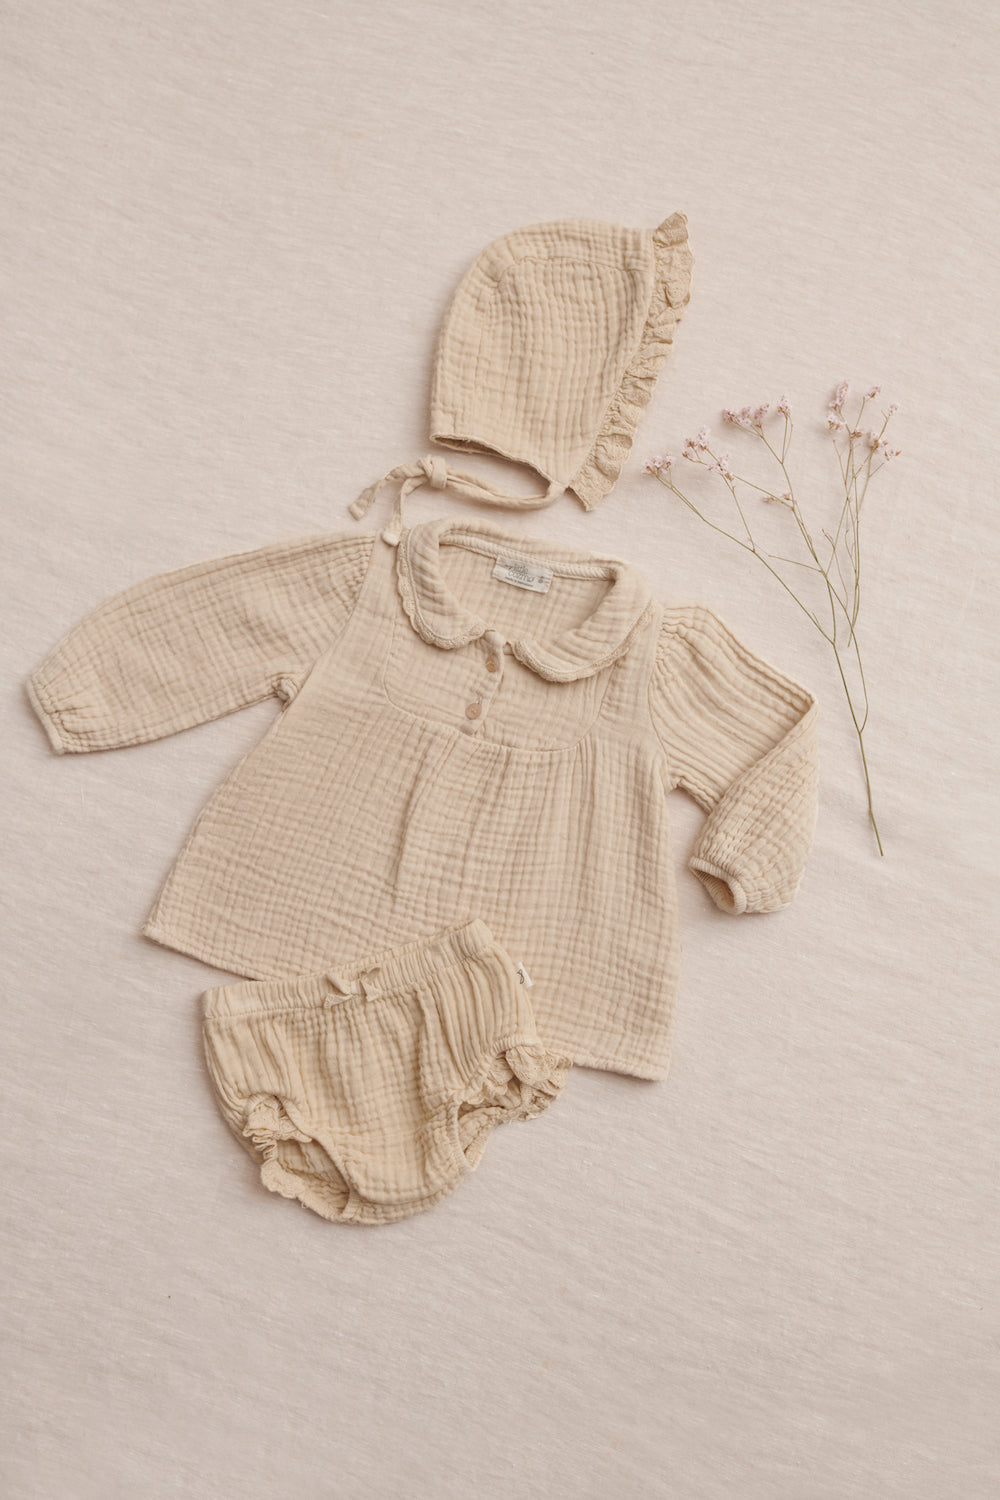 My Little Cozmo Tandem Organic Baby Blouse and Bloomers Set - Stone